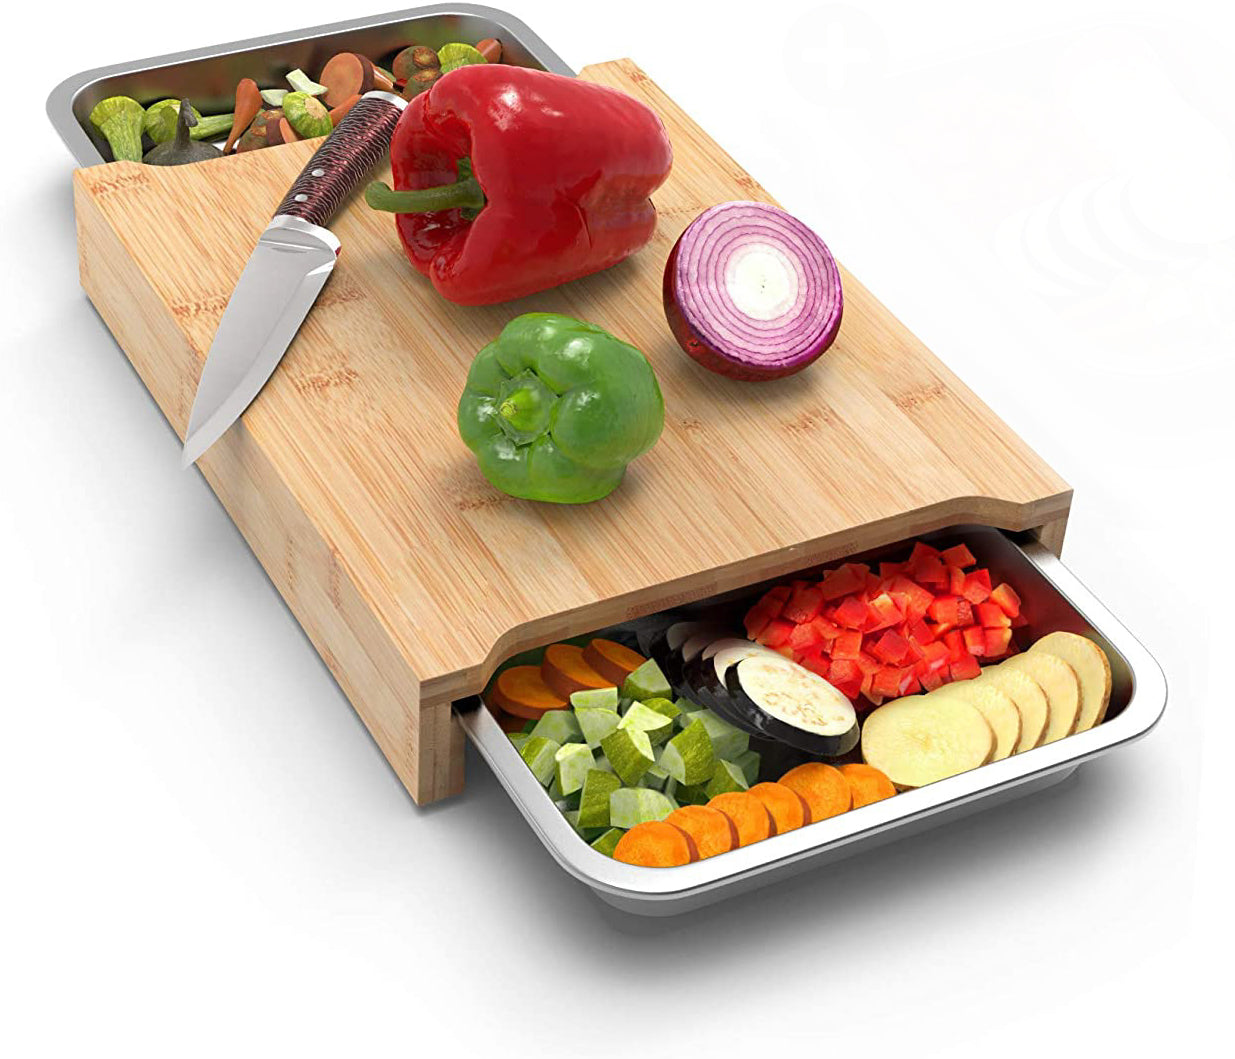 ecozoi Bamboo Cutting Board with 4 Organizing Trays and 2 Graters